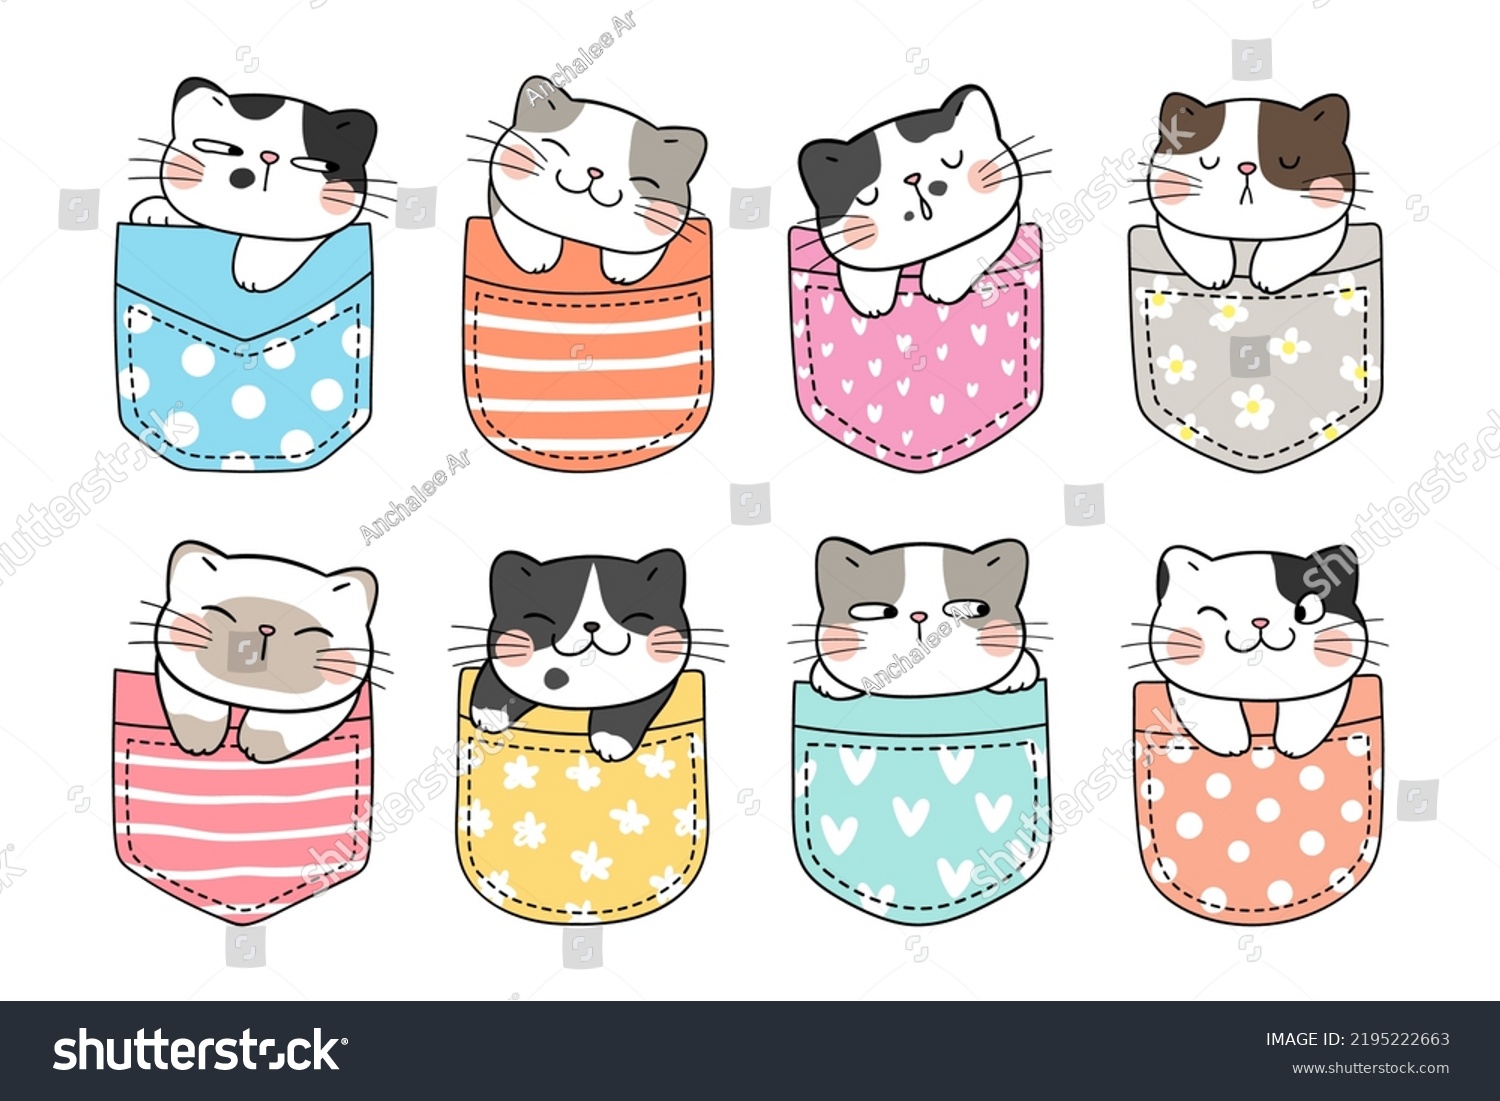 SVG of Draw vector illustration character design collection funny cats in pocket Doodle cartoon style svg